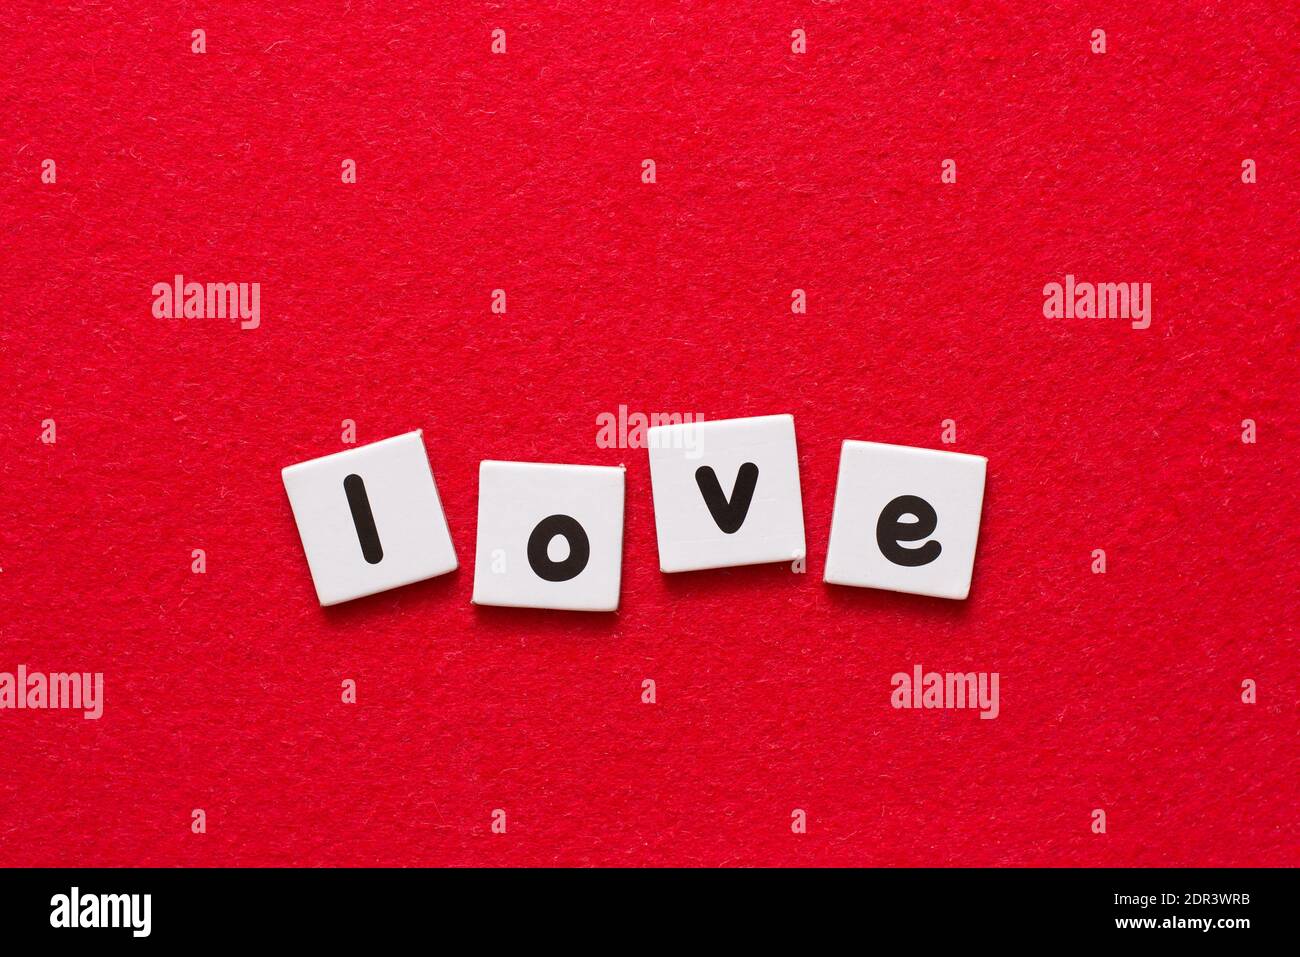 Love lettering word written by black printed letters on white sheets of paper on red background Stock Photo